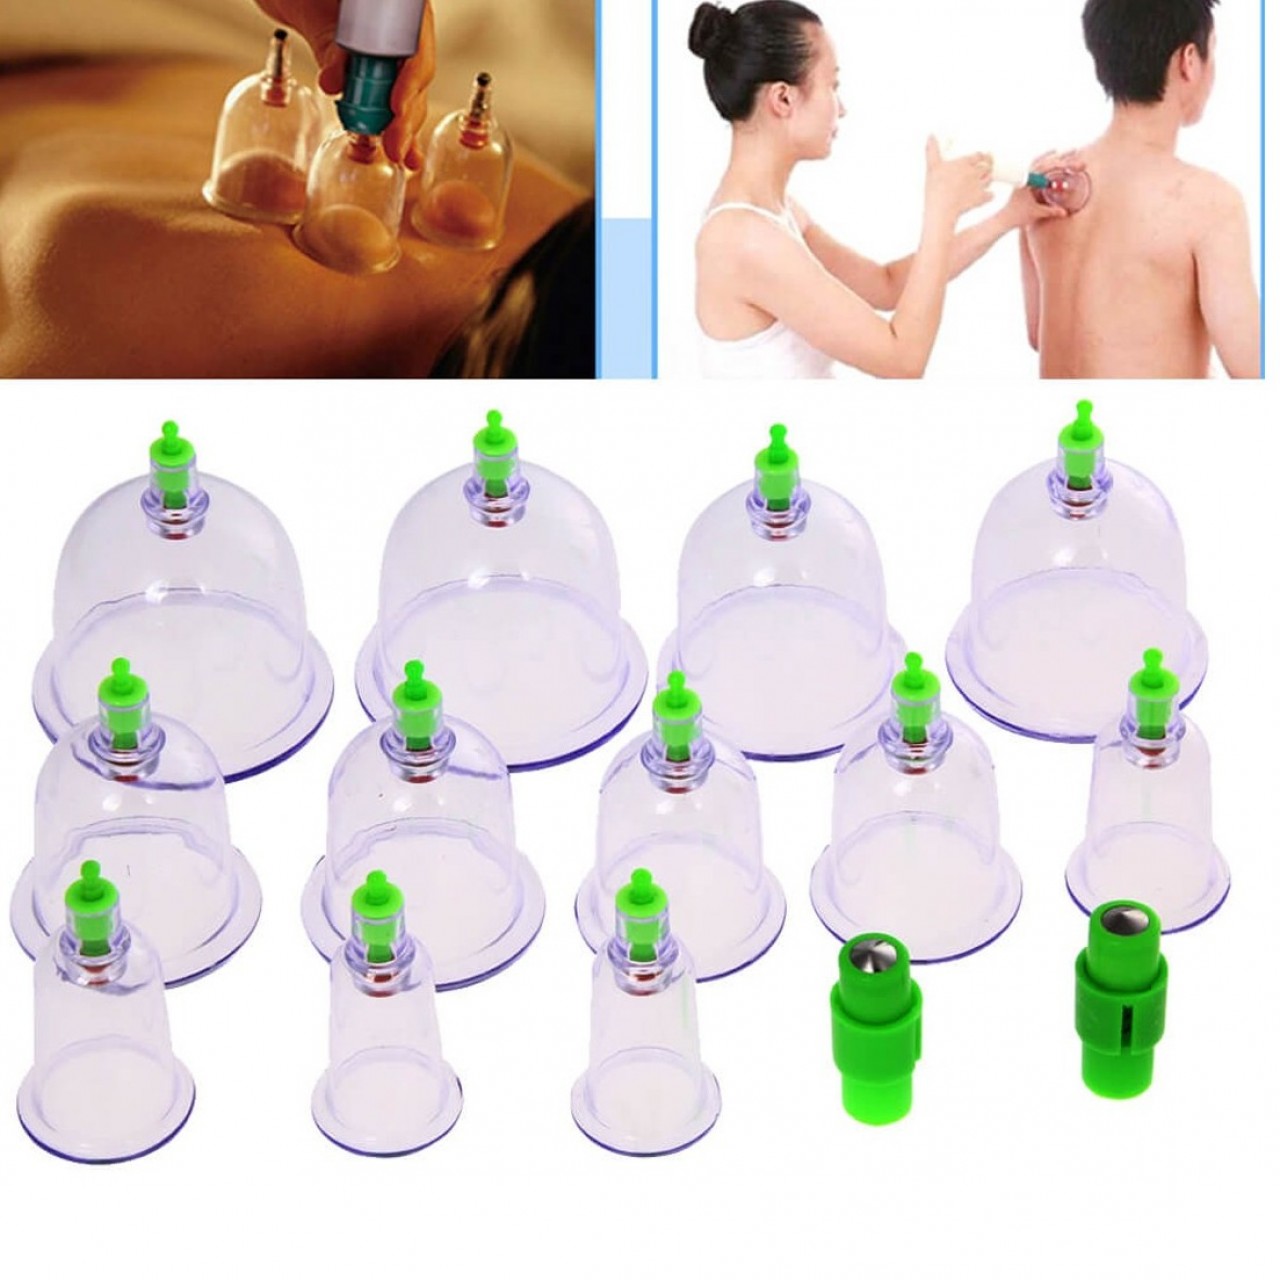 Hijama Therapy Device -  Medical Vacuum Cupping Suction  Set (12 Cups)